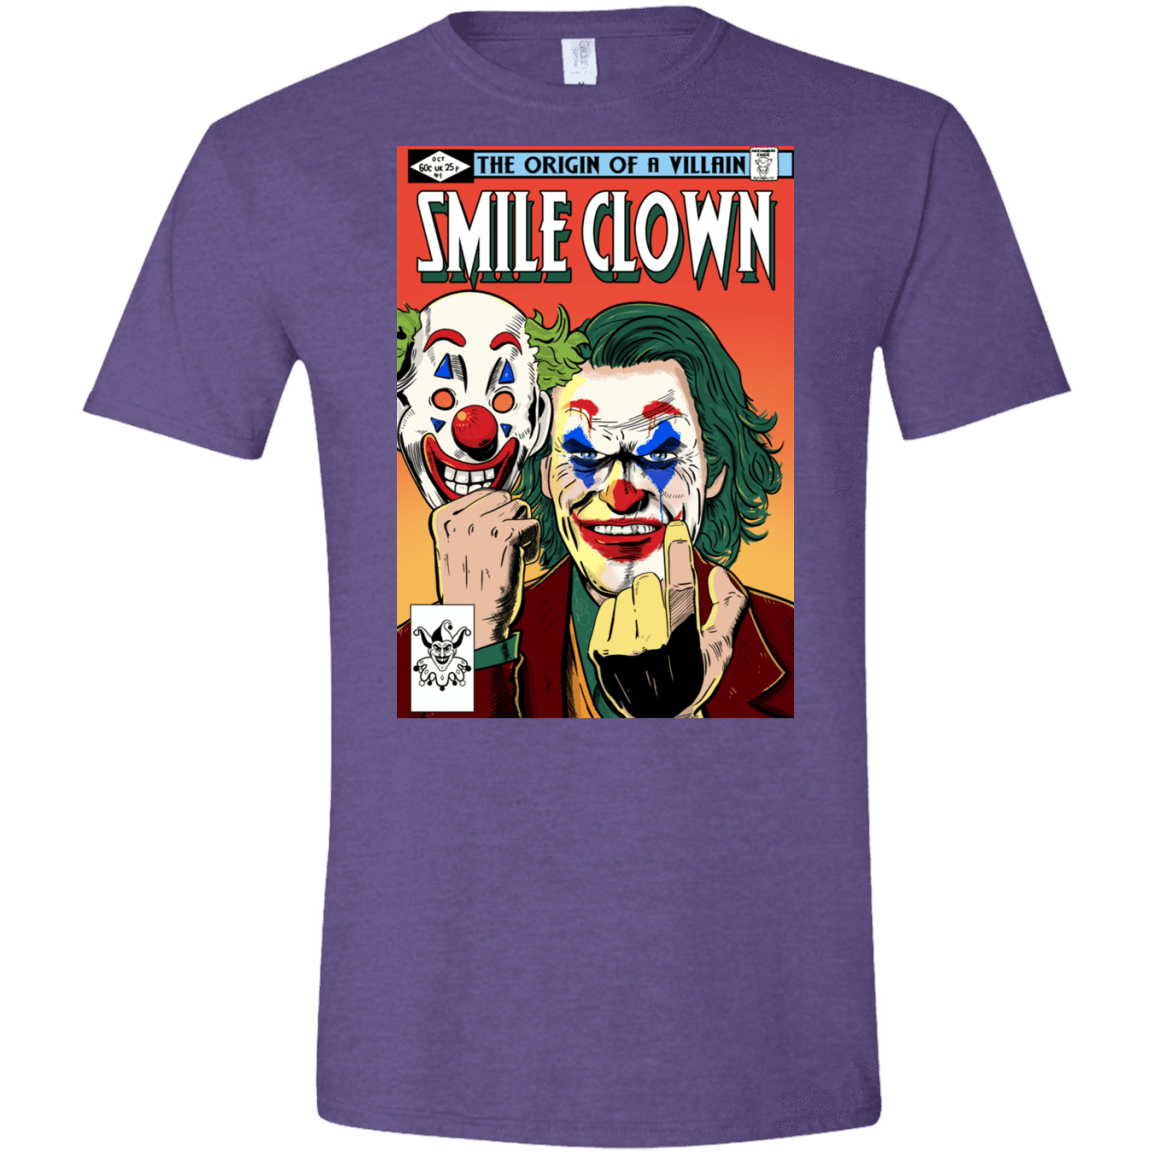 T-Shirts Heather Purple / S Smile Clown Men's Semi-Fitted Softstyle